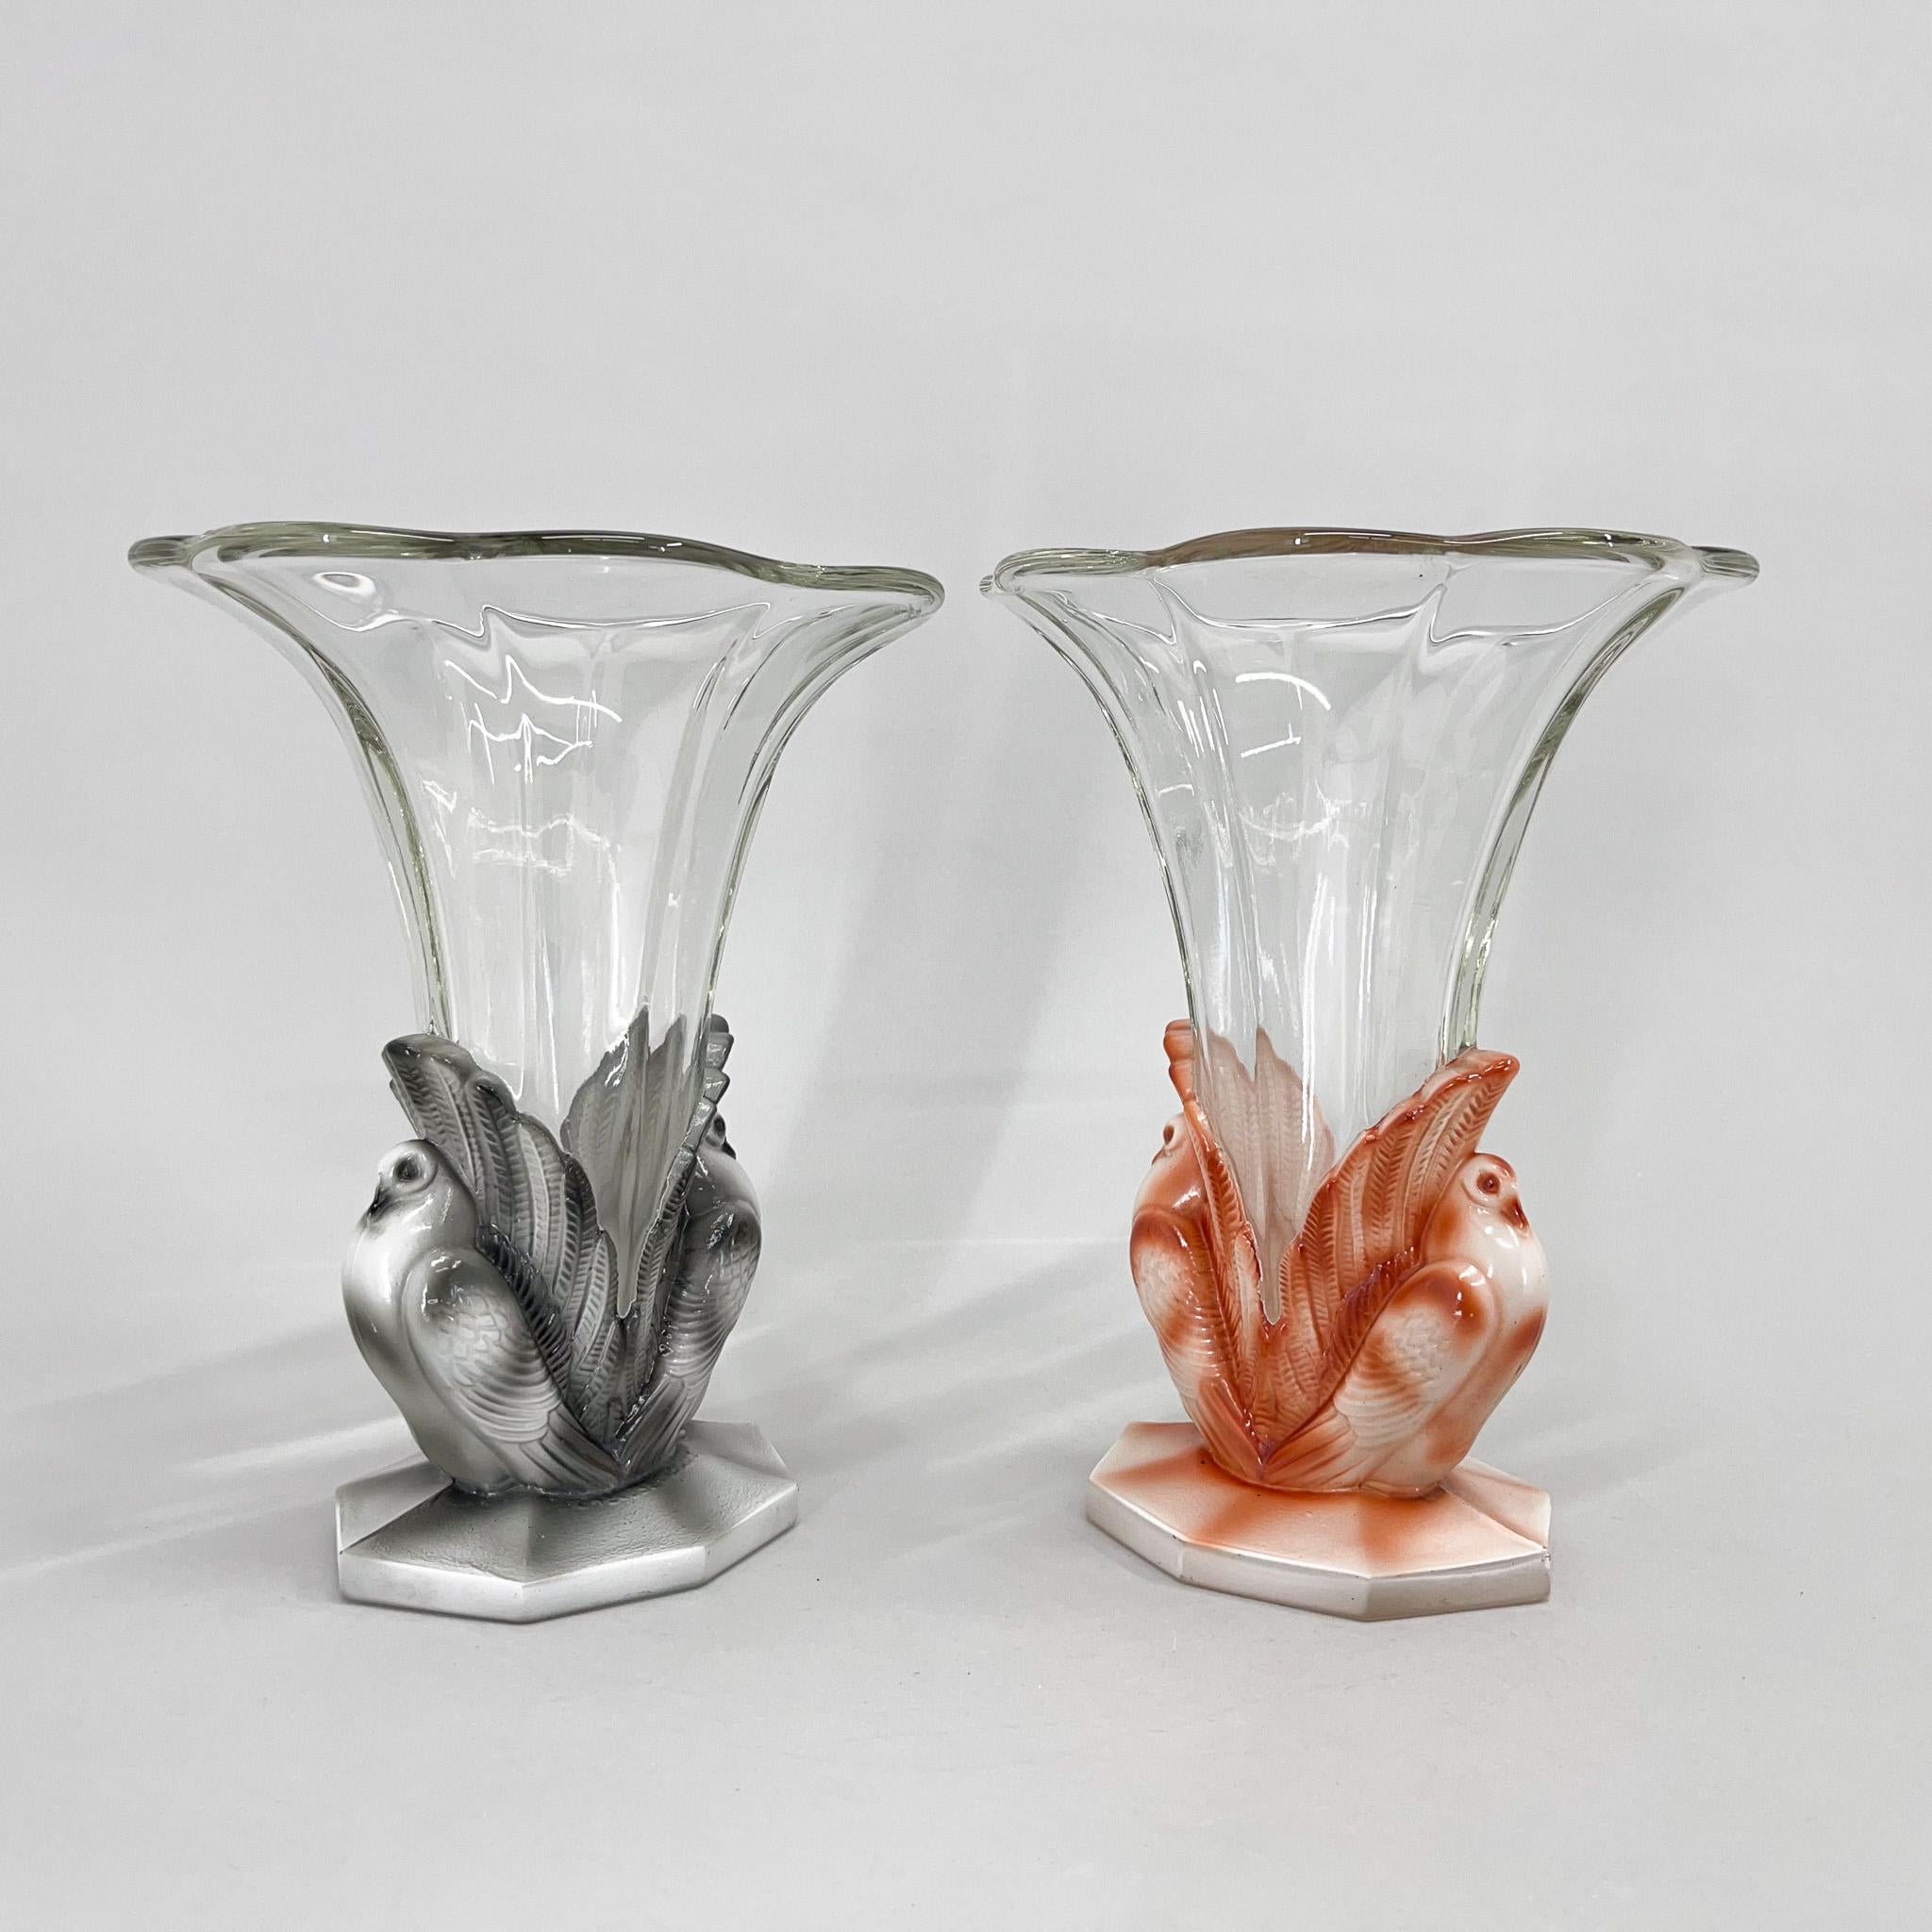 Pair of two art deco vases designed by Josef Feigl and produced by Libochovice Glassworks in the 1930's in former Czechoslovakia. Rarely to be seen in colour.